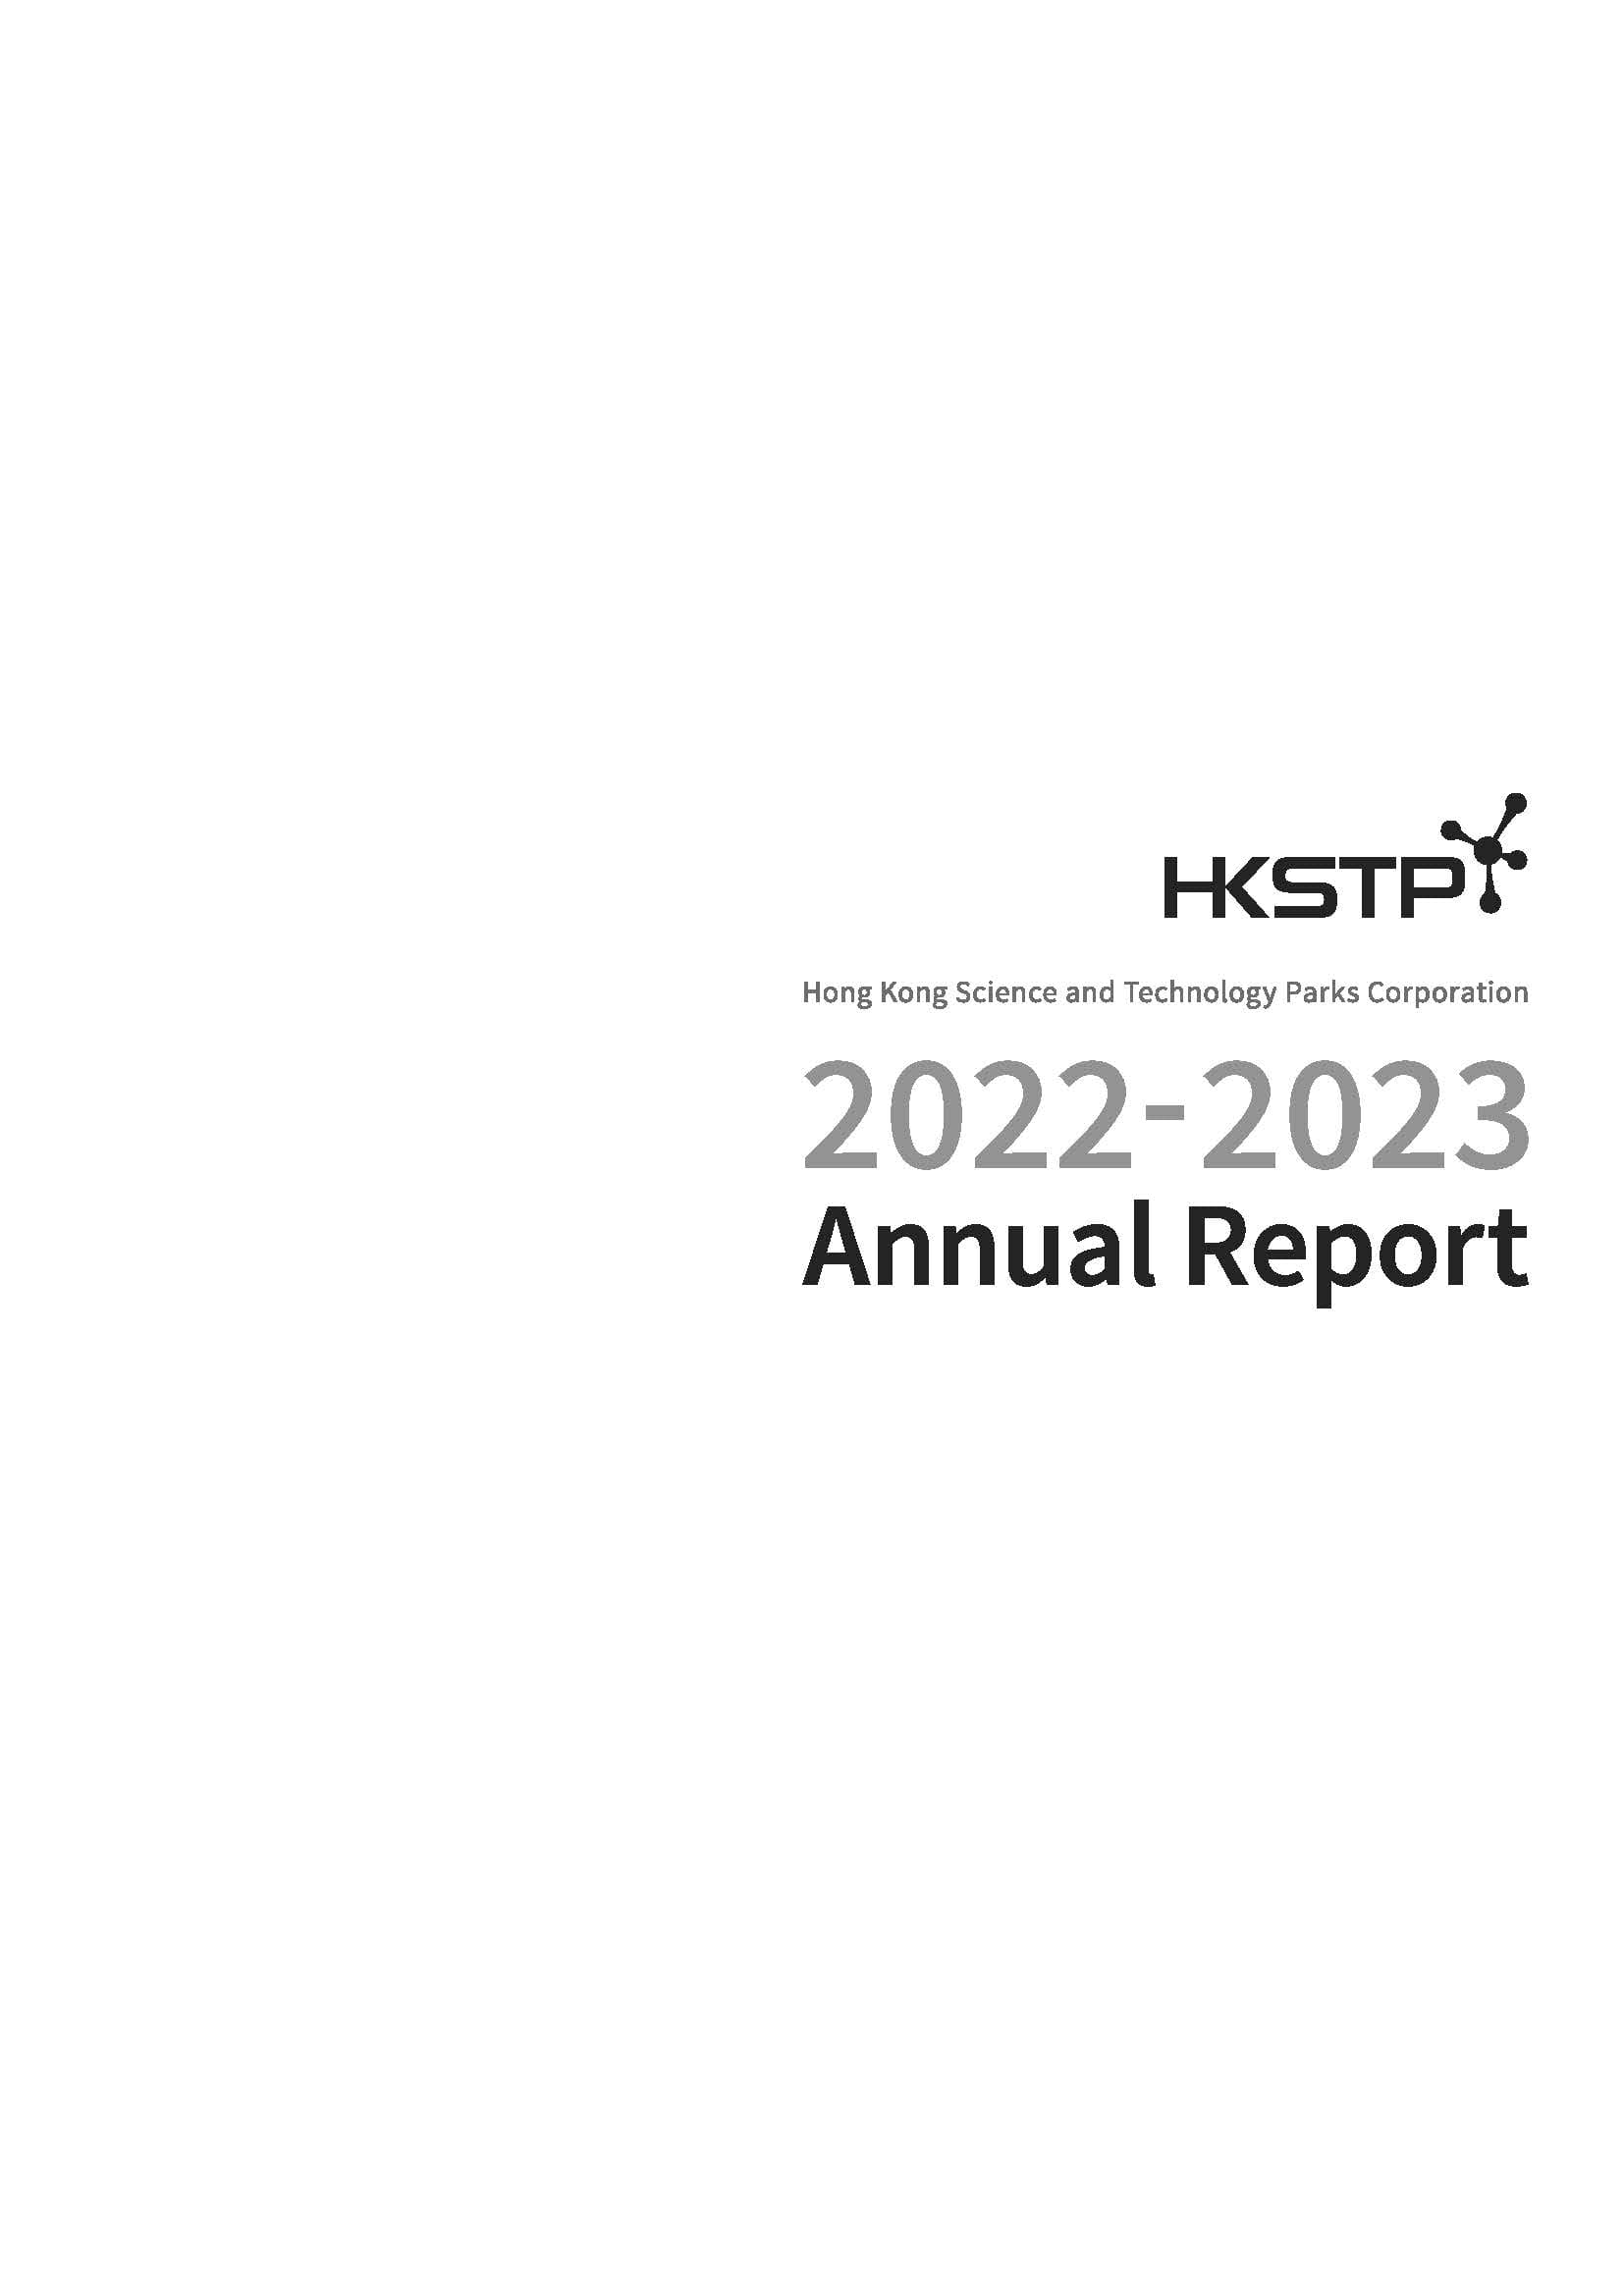 hkstpc-annual-report-2022-23-eng_wca_page_01